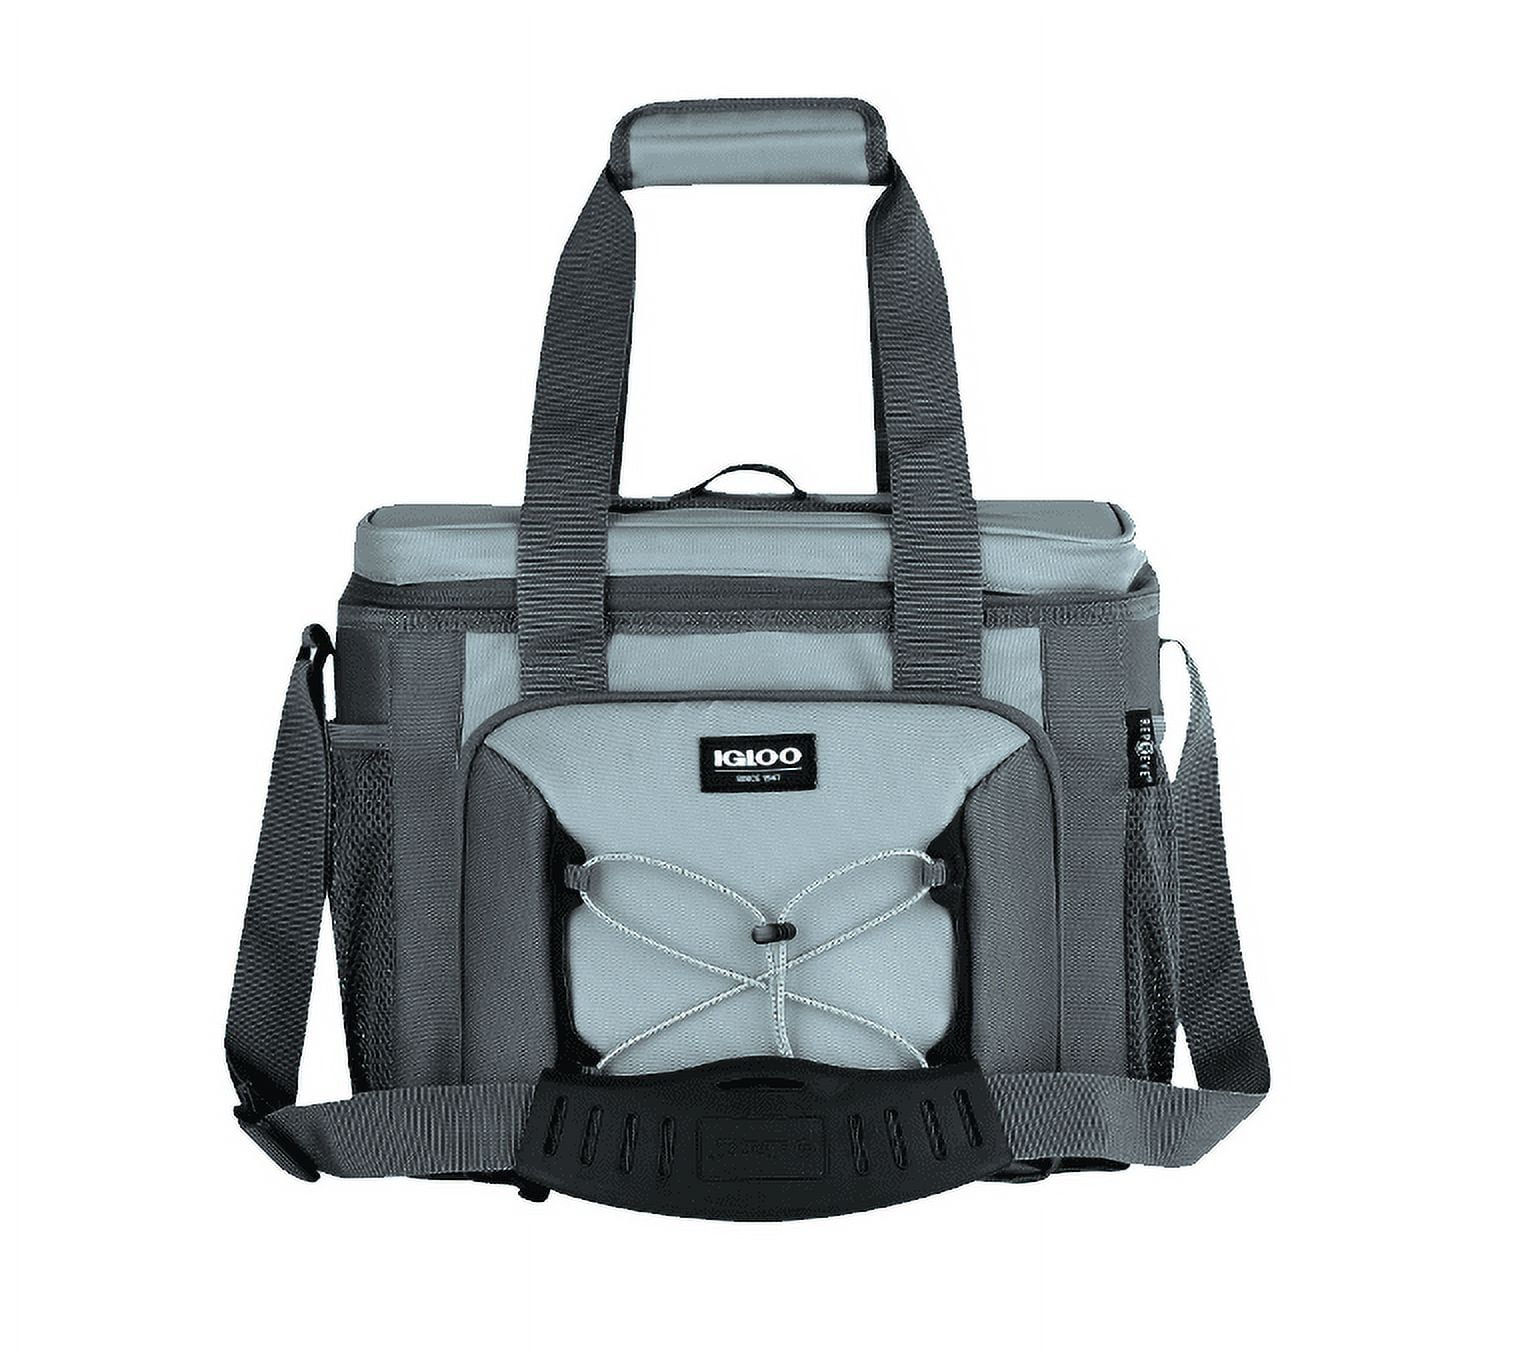 Igloo MaxCold Voyager 30-Can Backpack Cooler